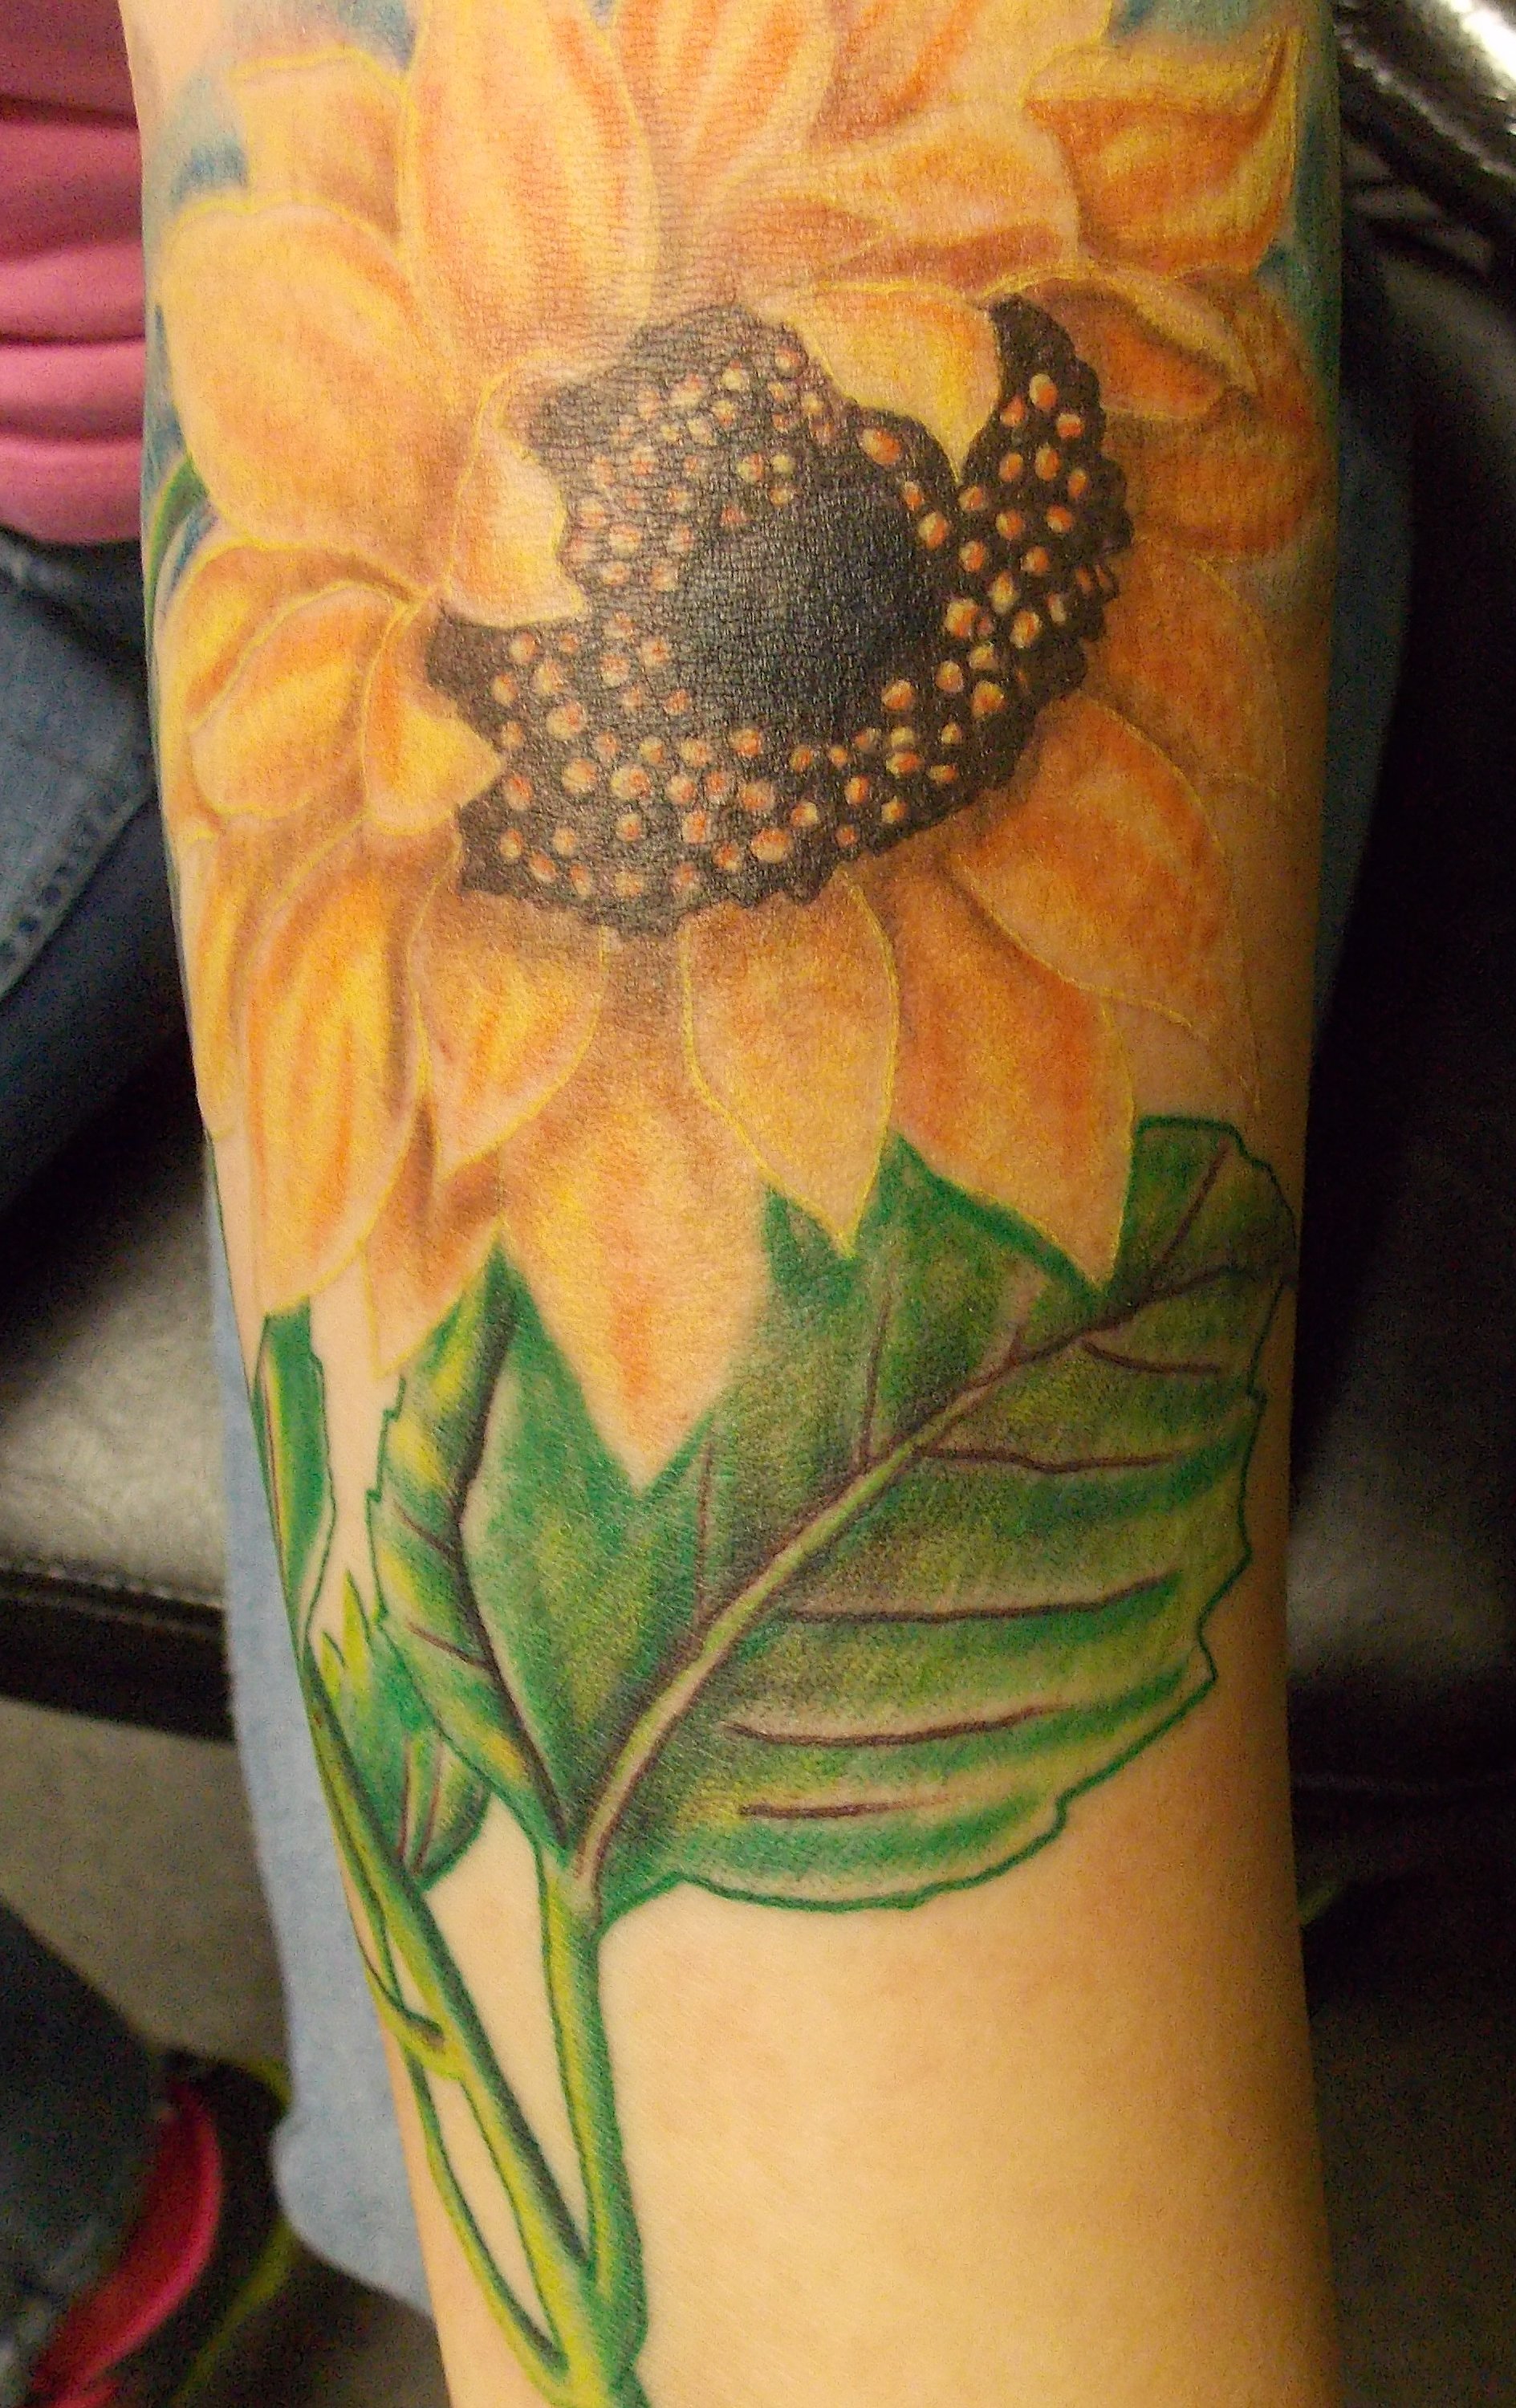 Gorgeous sunflower tattoo ideas to make your arm delightful